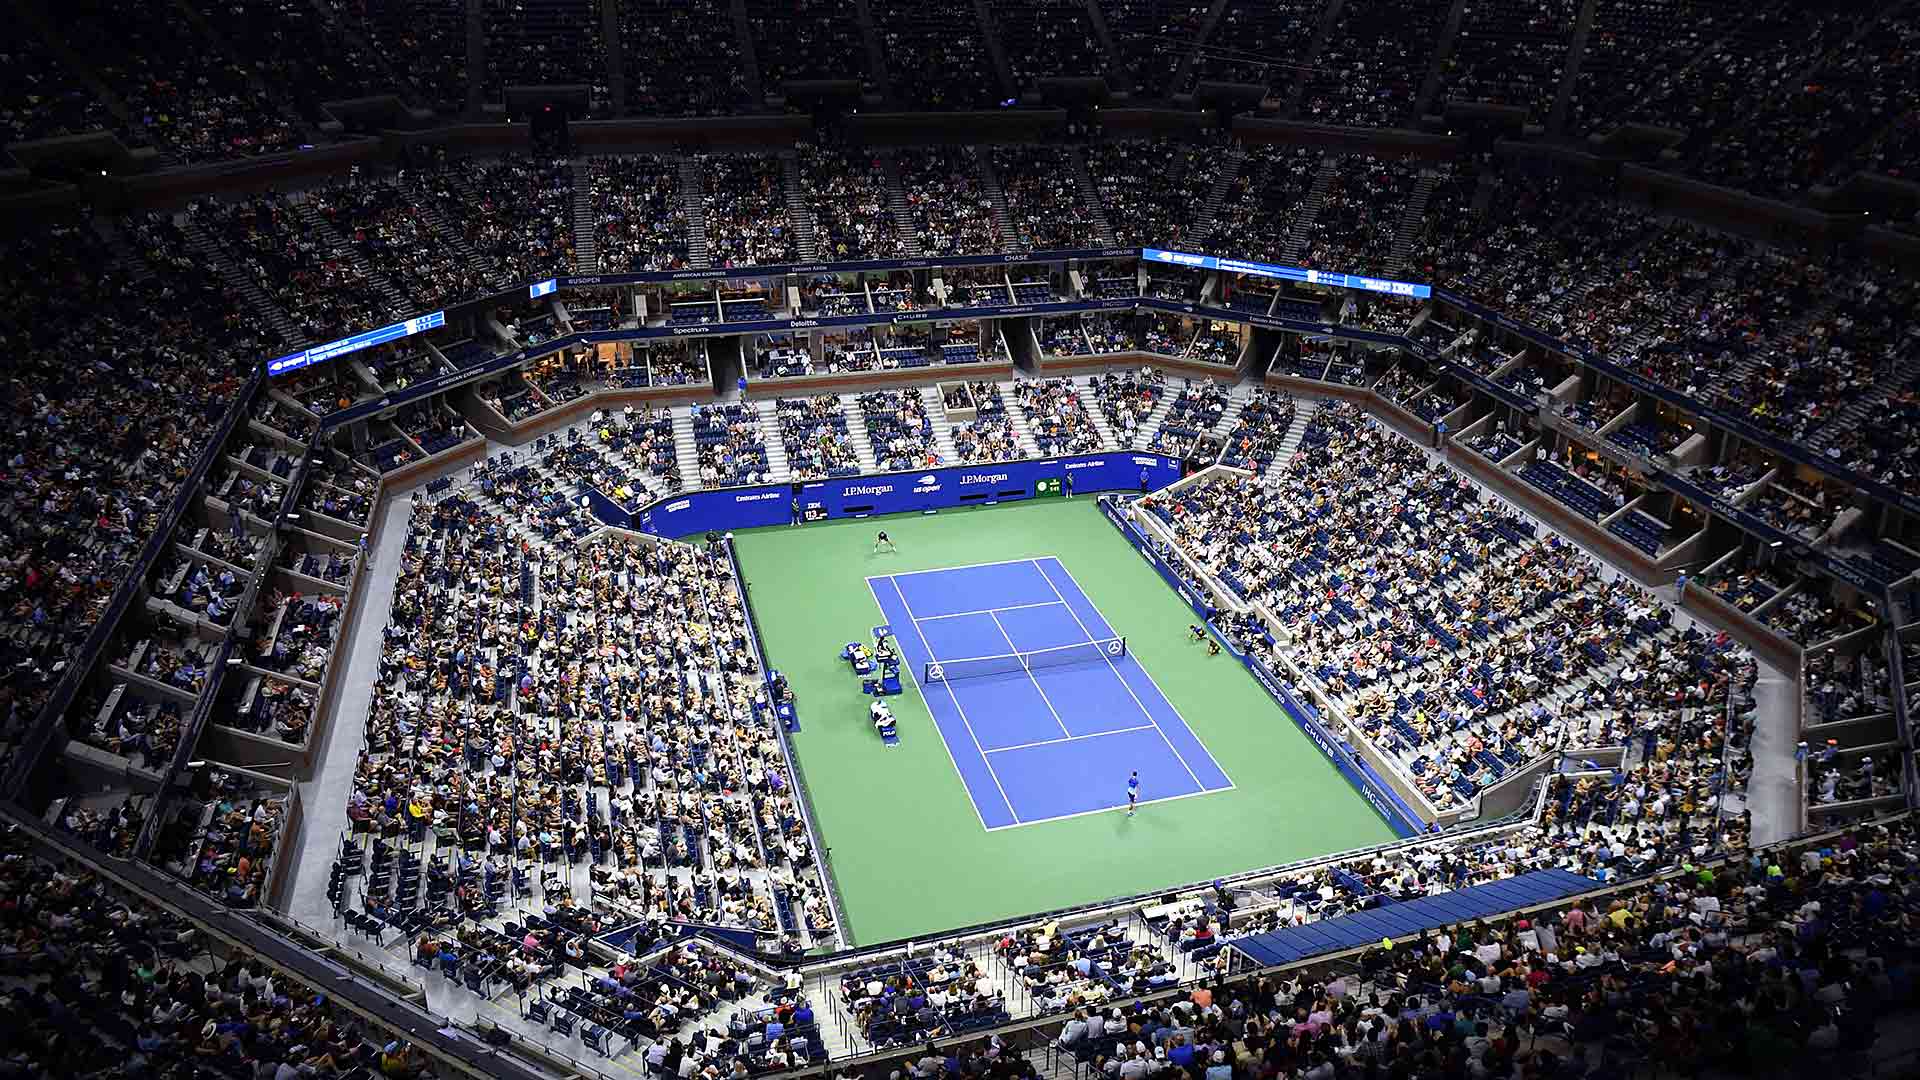 Us Tennis Open Schedule For Today On Sale, Save 58 jlcatj.gob.mx